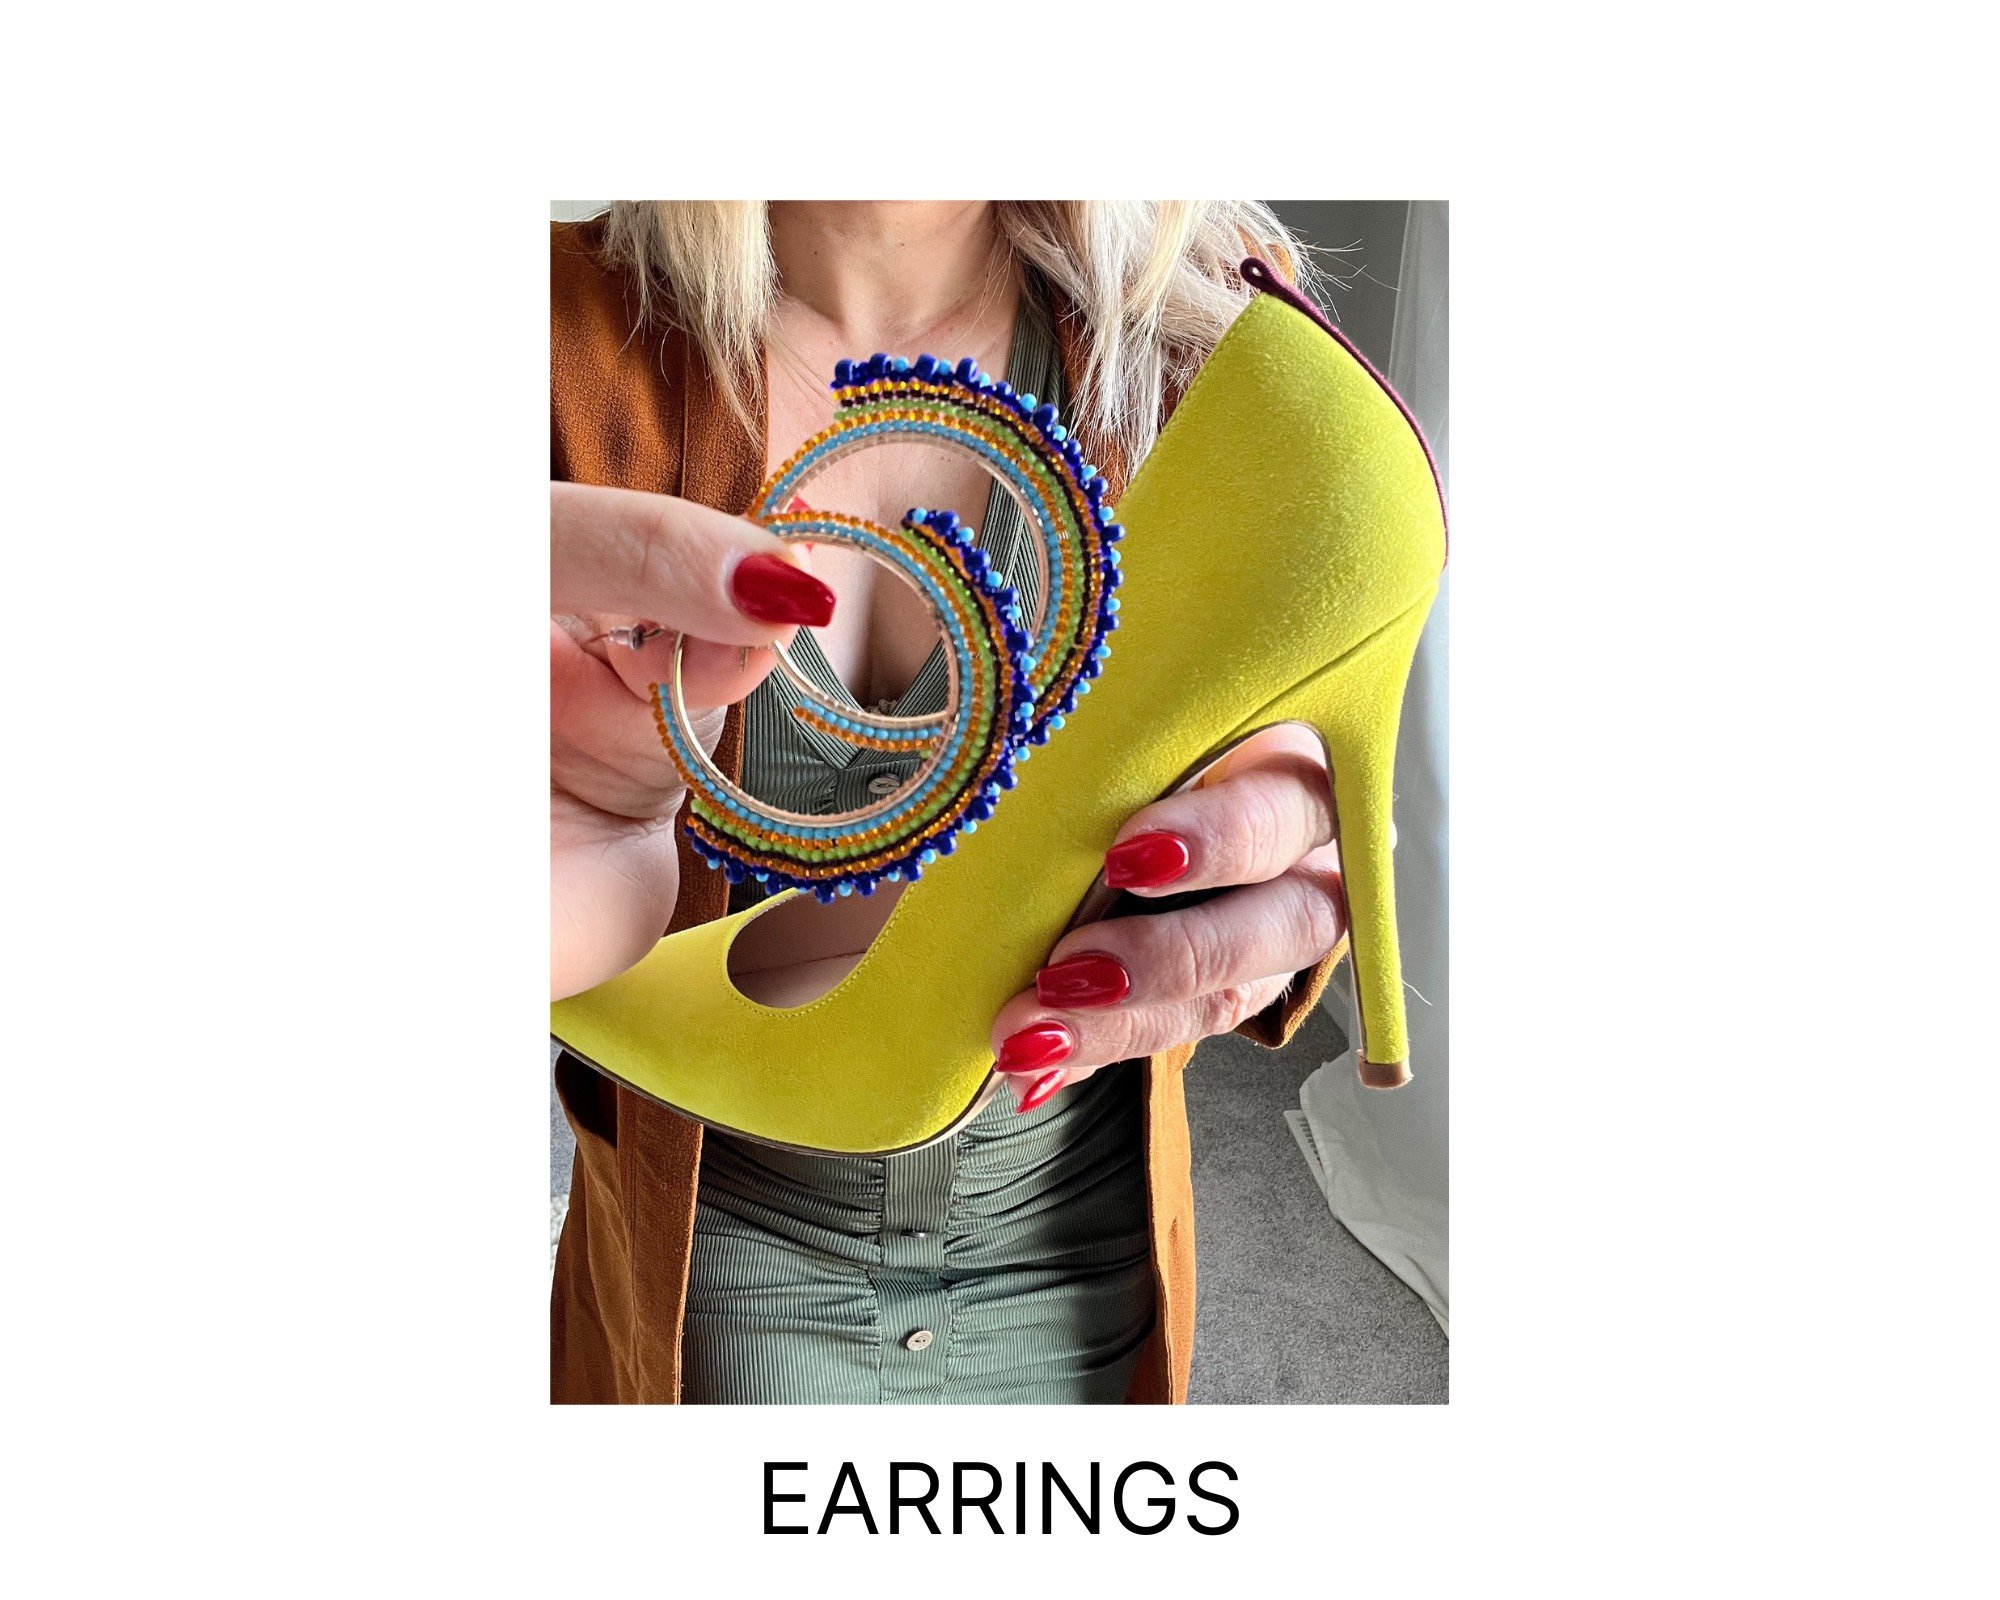 EXPRESS YOURSELF WITH ANY EARRING: HOOP, STUDS, CLAY EARRING, MIXED METALS... THE OPTIONS ARE ENDLESS